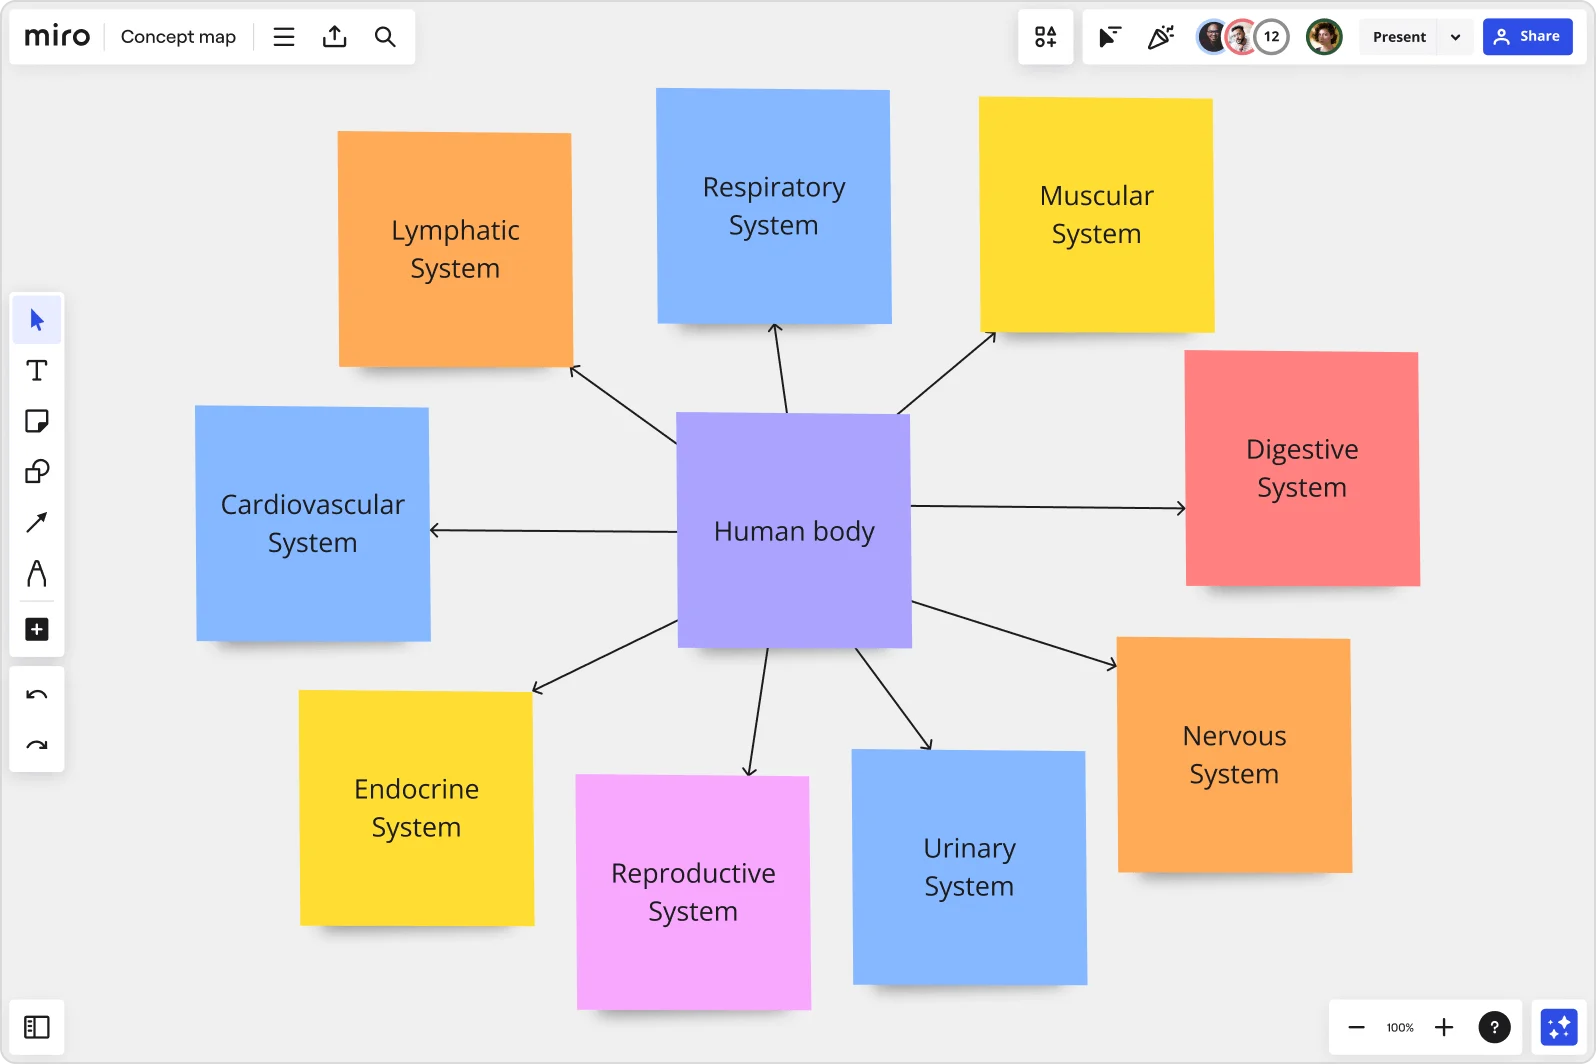 An image showing how dynamic Miro's concept map maker is